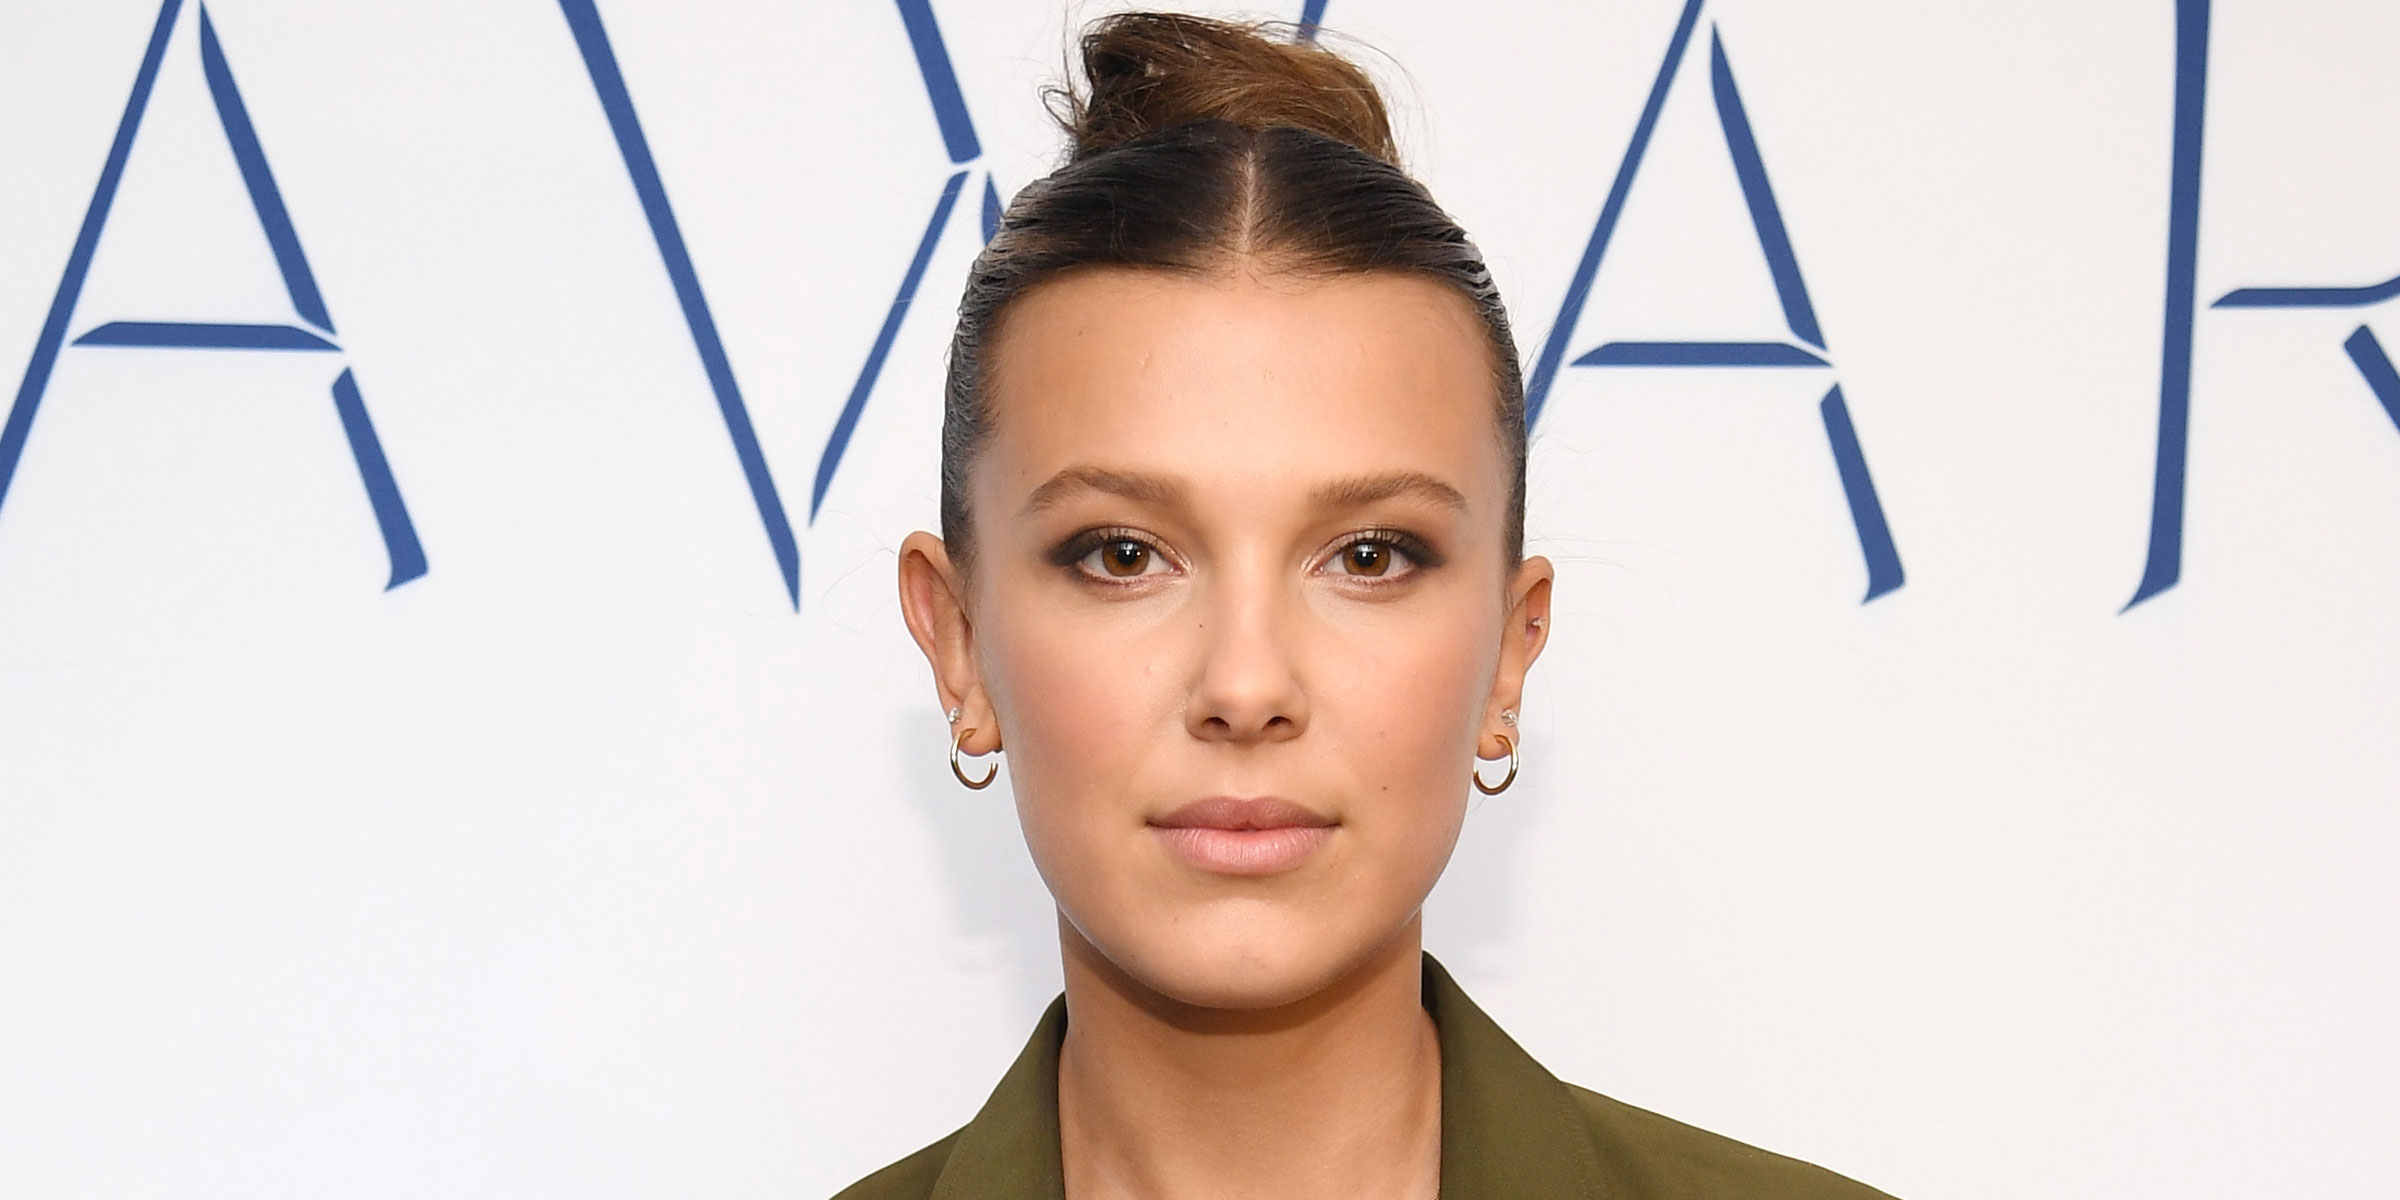 Millie Bobby Brown in an event show